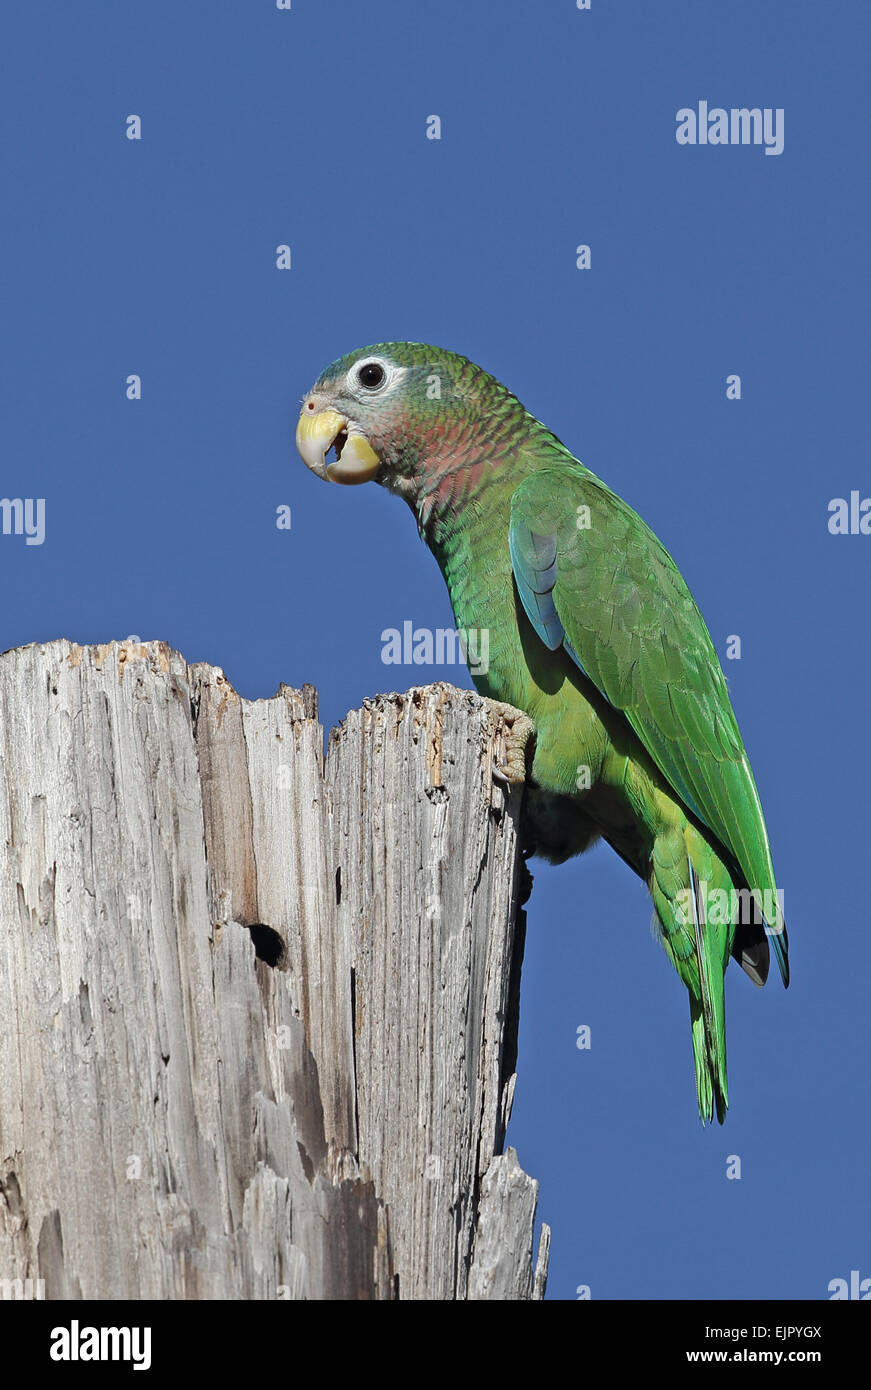 Yellow-billed Amazon Parrot (Amazona collaria) adult, perched on old post, Hope Gardens, Kingston, Jamaica, December Stock Photo